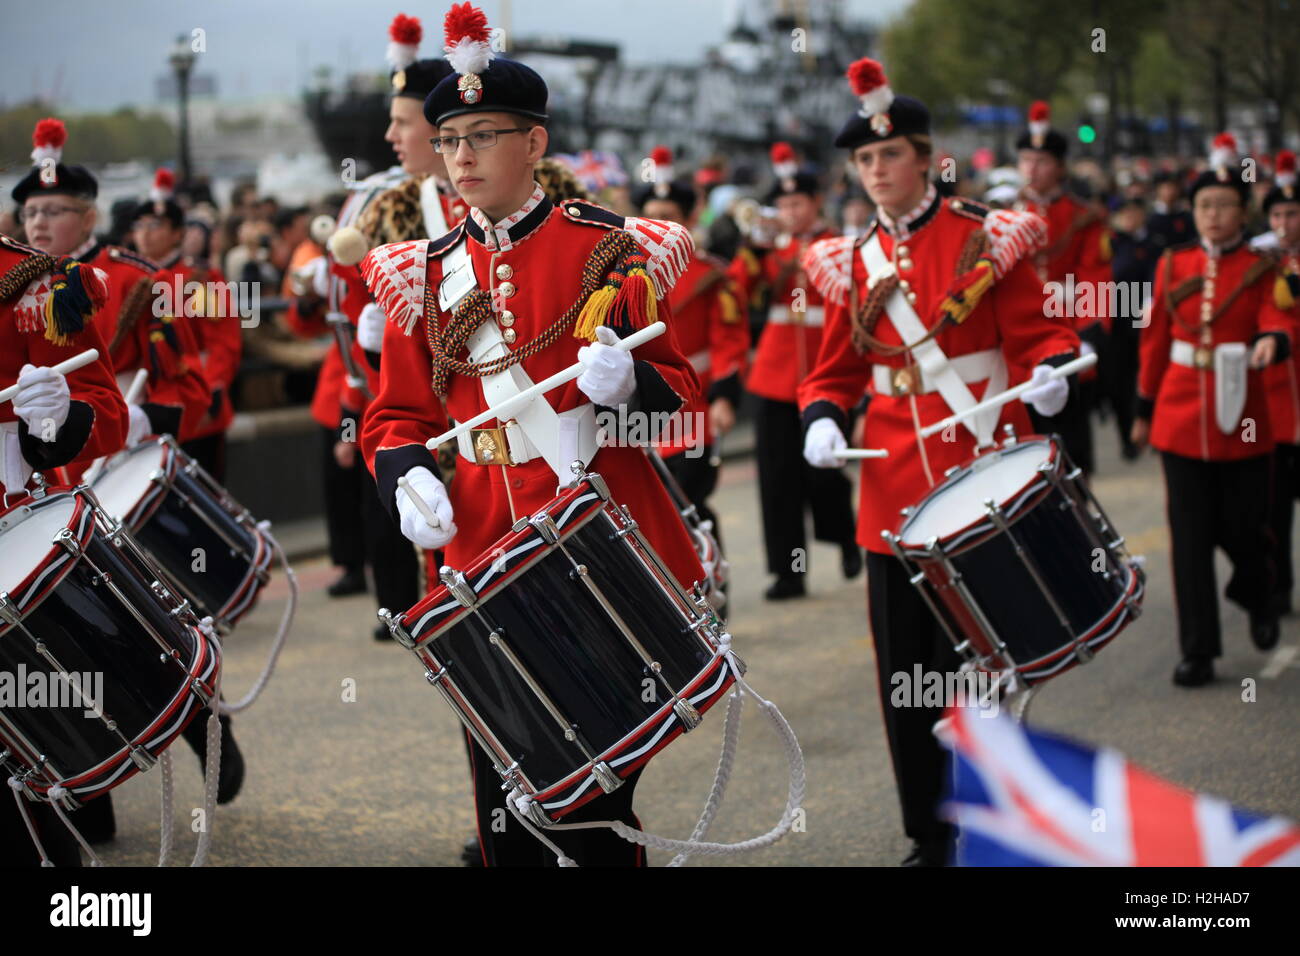 St Dunstan’s College Combined Cadet Force & Corps of Drums at the Lord Mayor's Show, London, UK. Stock Photo